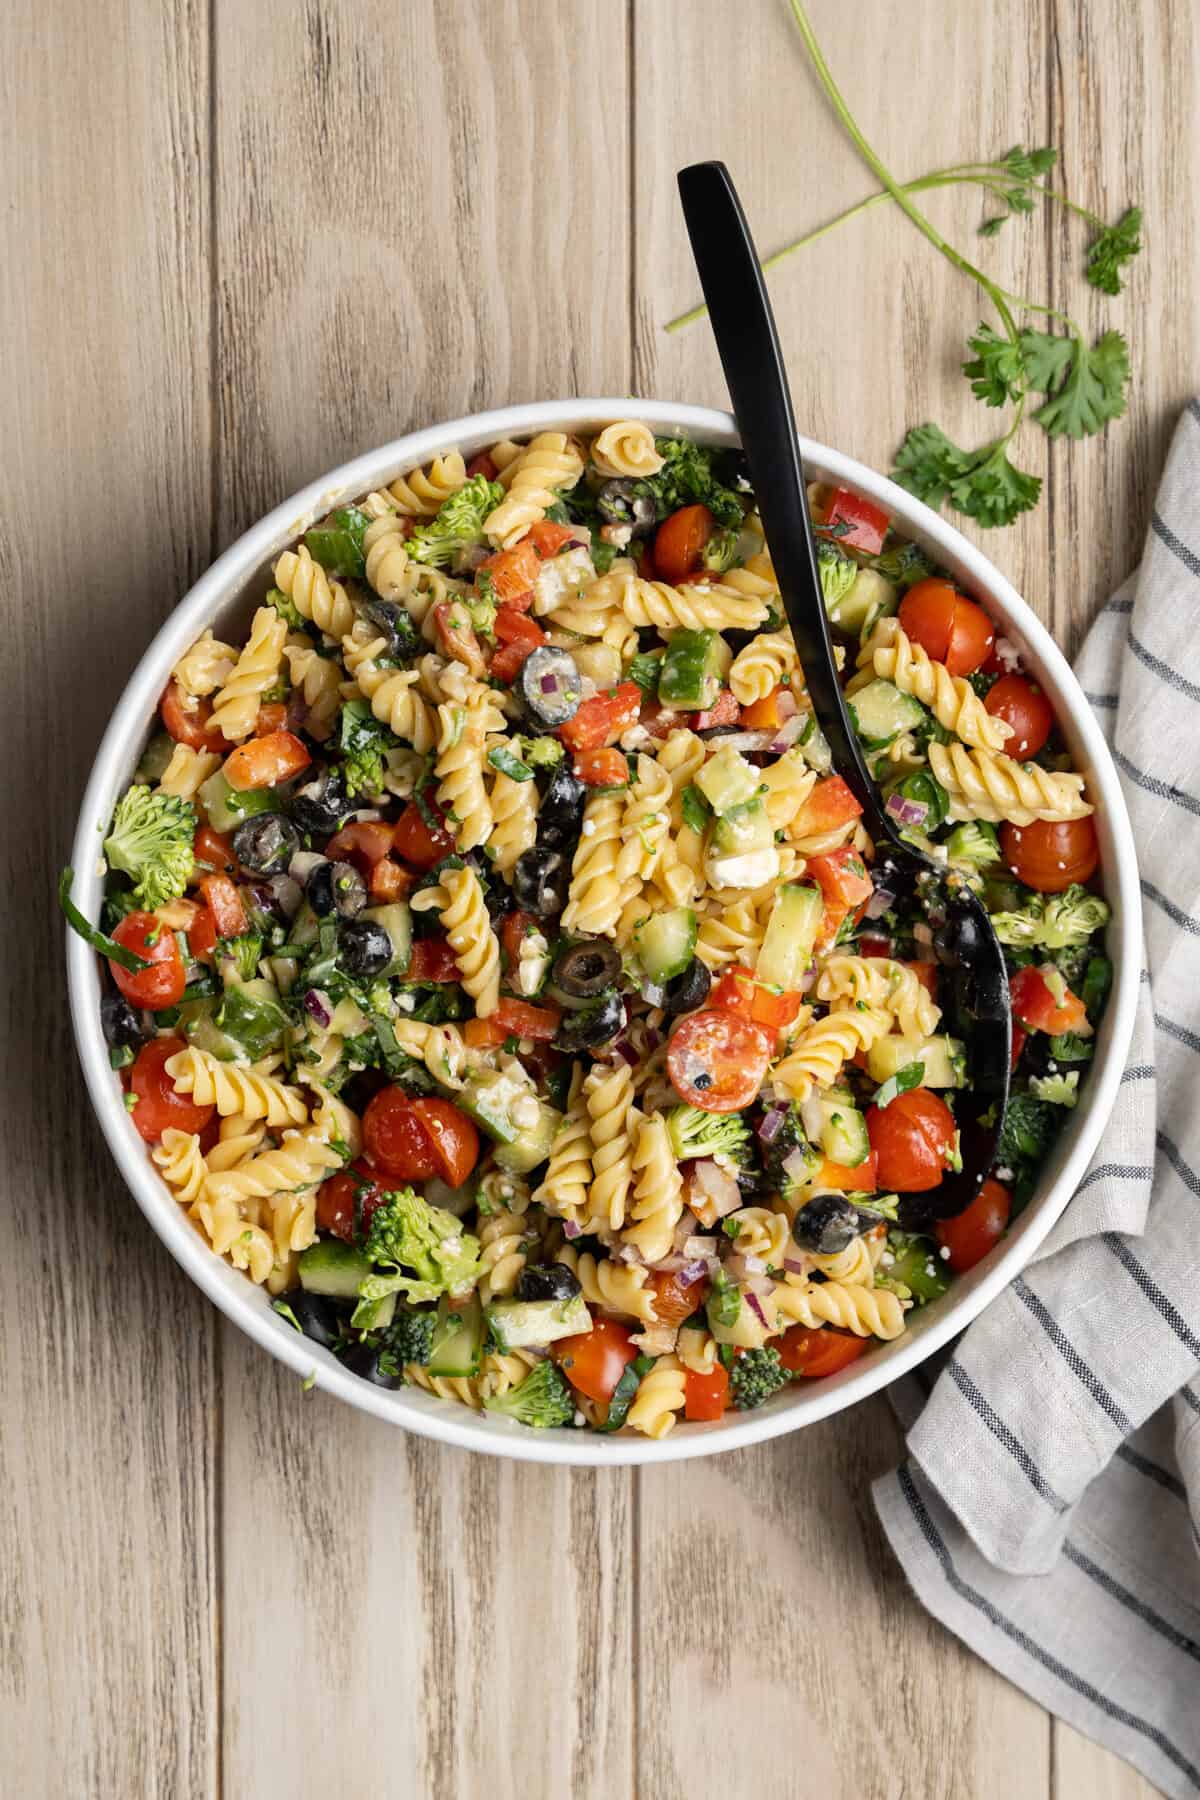 Serving spoon in a bowl of high protein pasta salad.